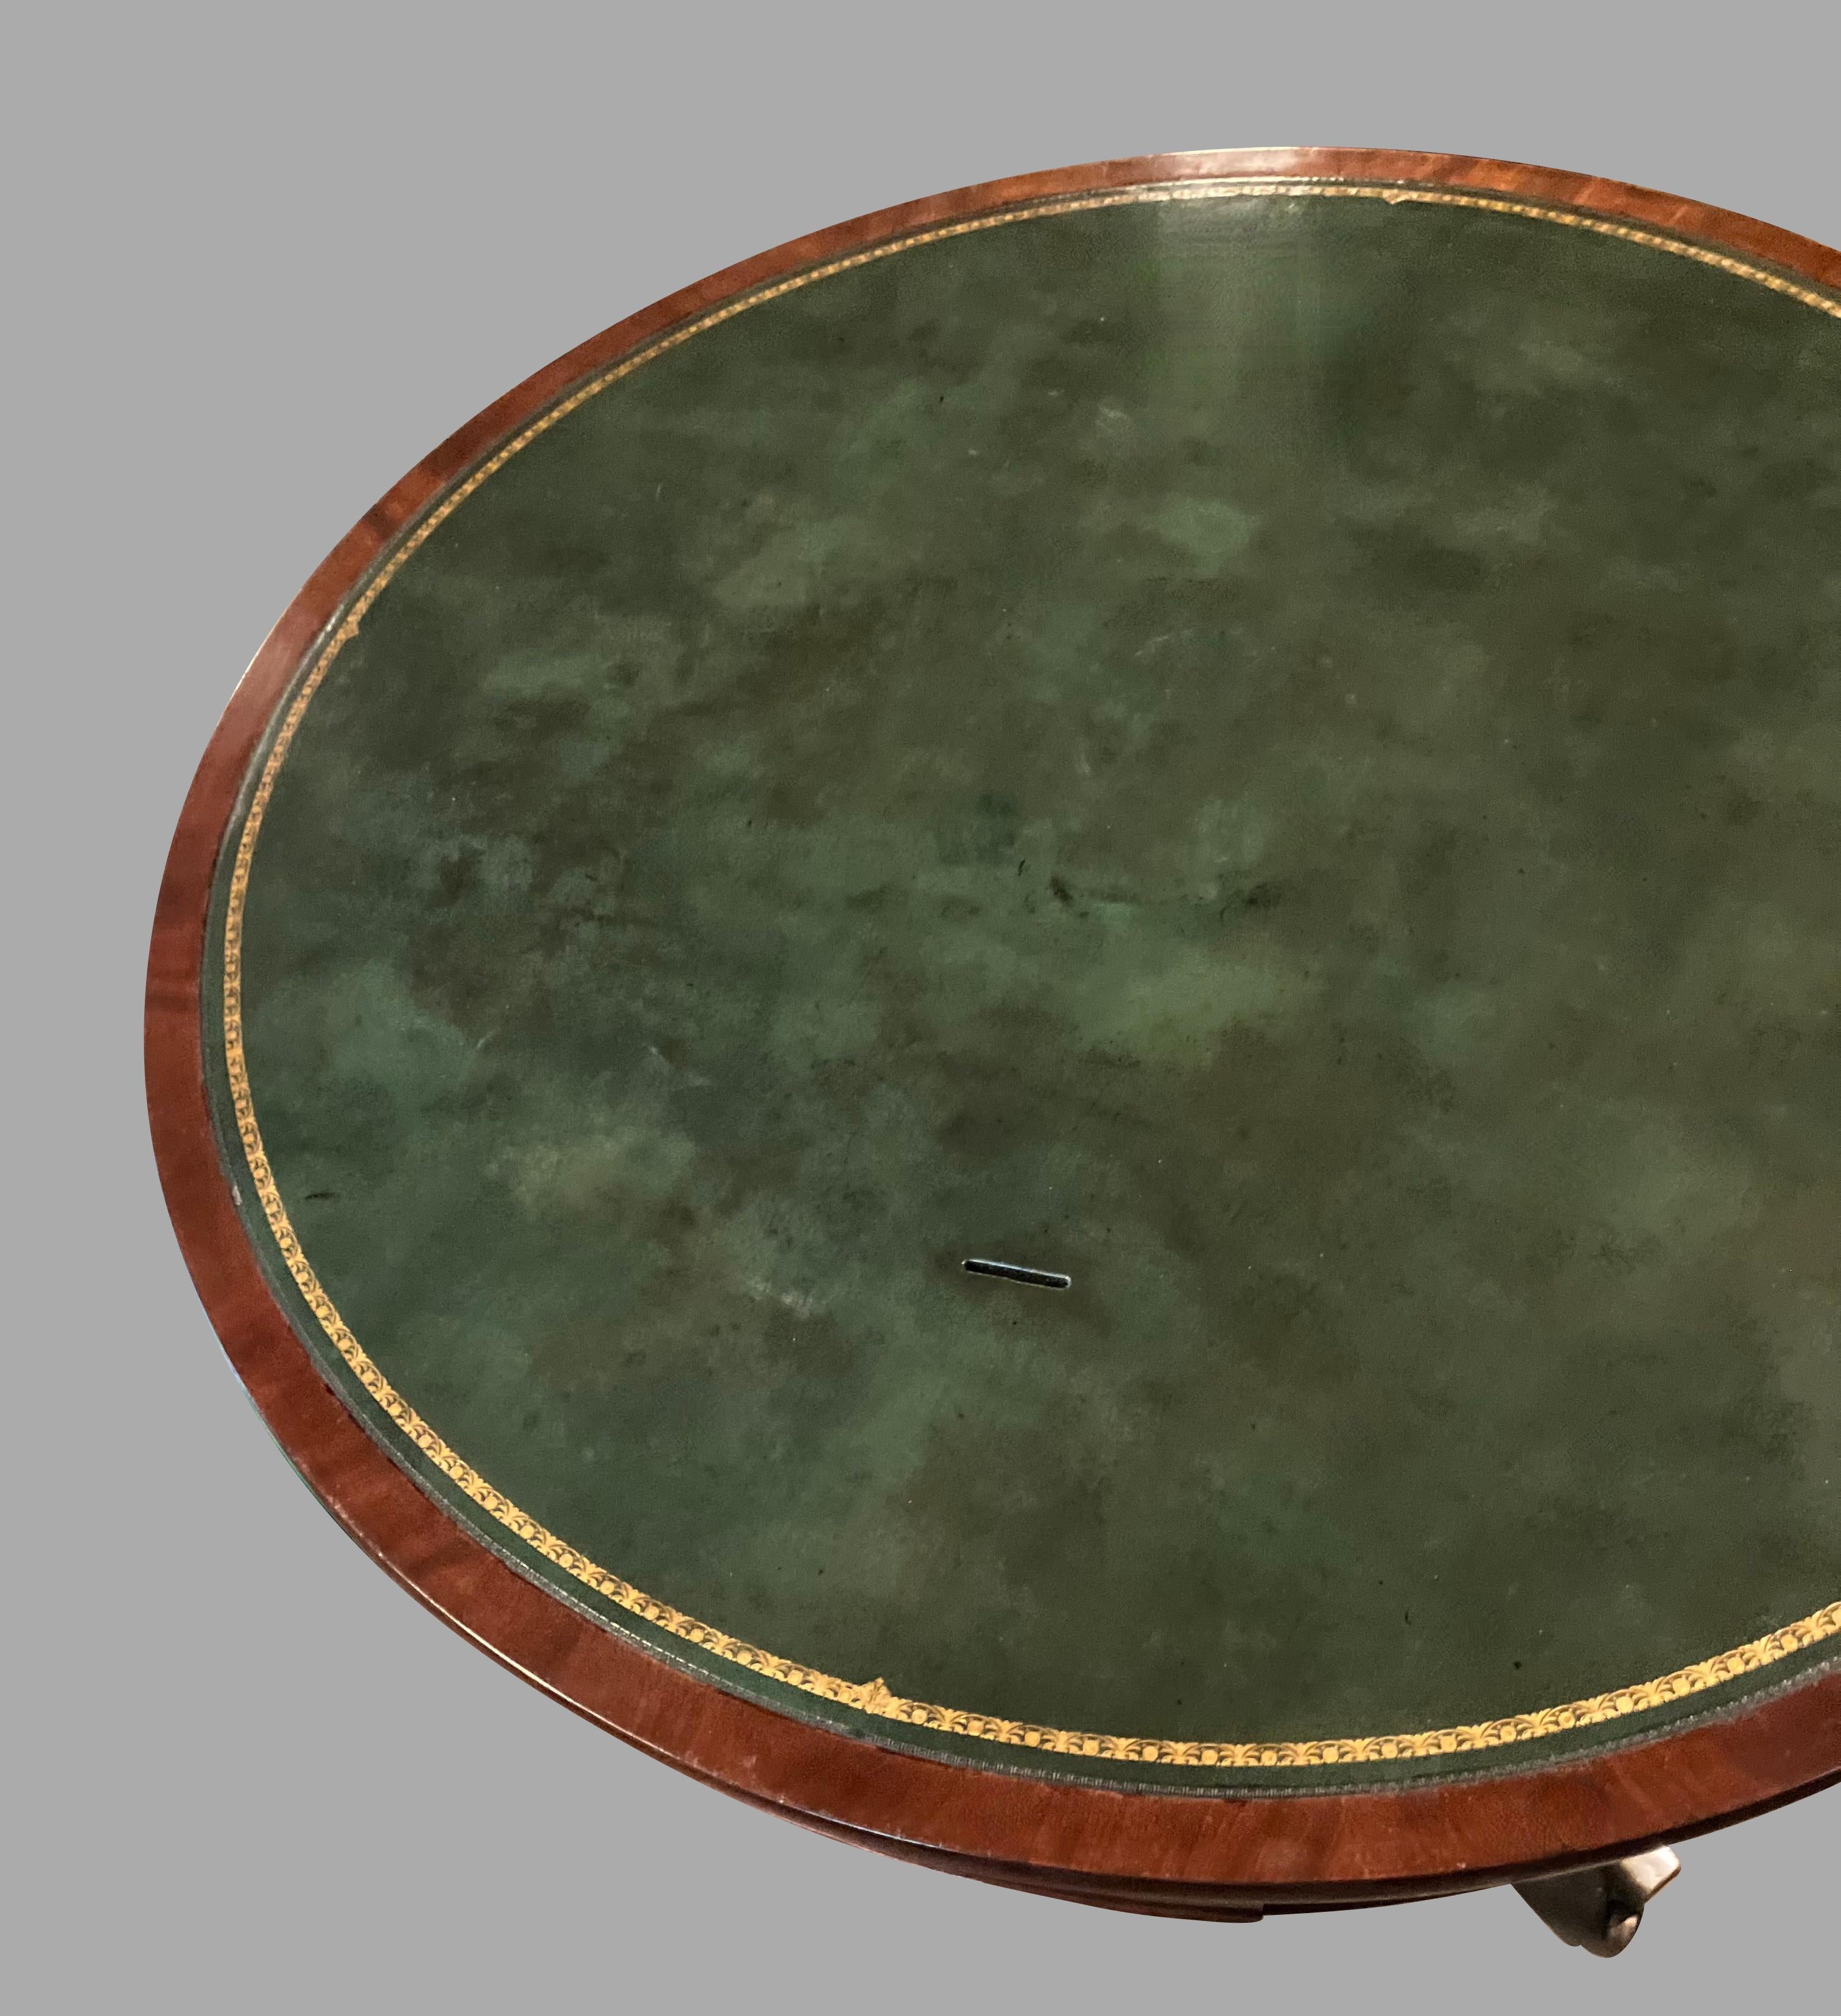 English Regency Style Mahogany Drum Table with Rotating Gilt-Tooled Leather Top For Sale 2